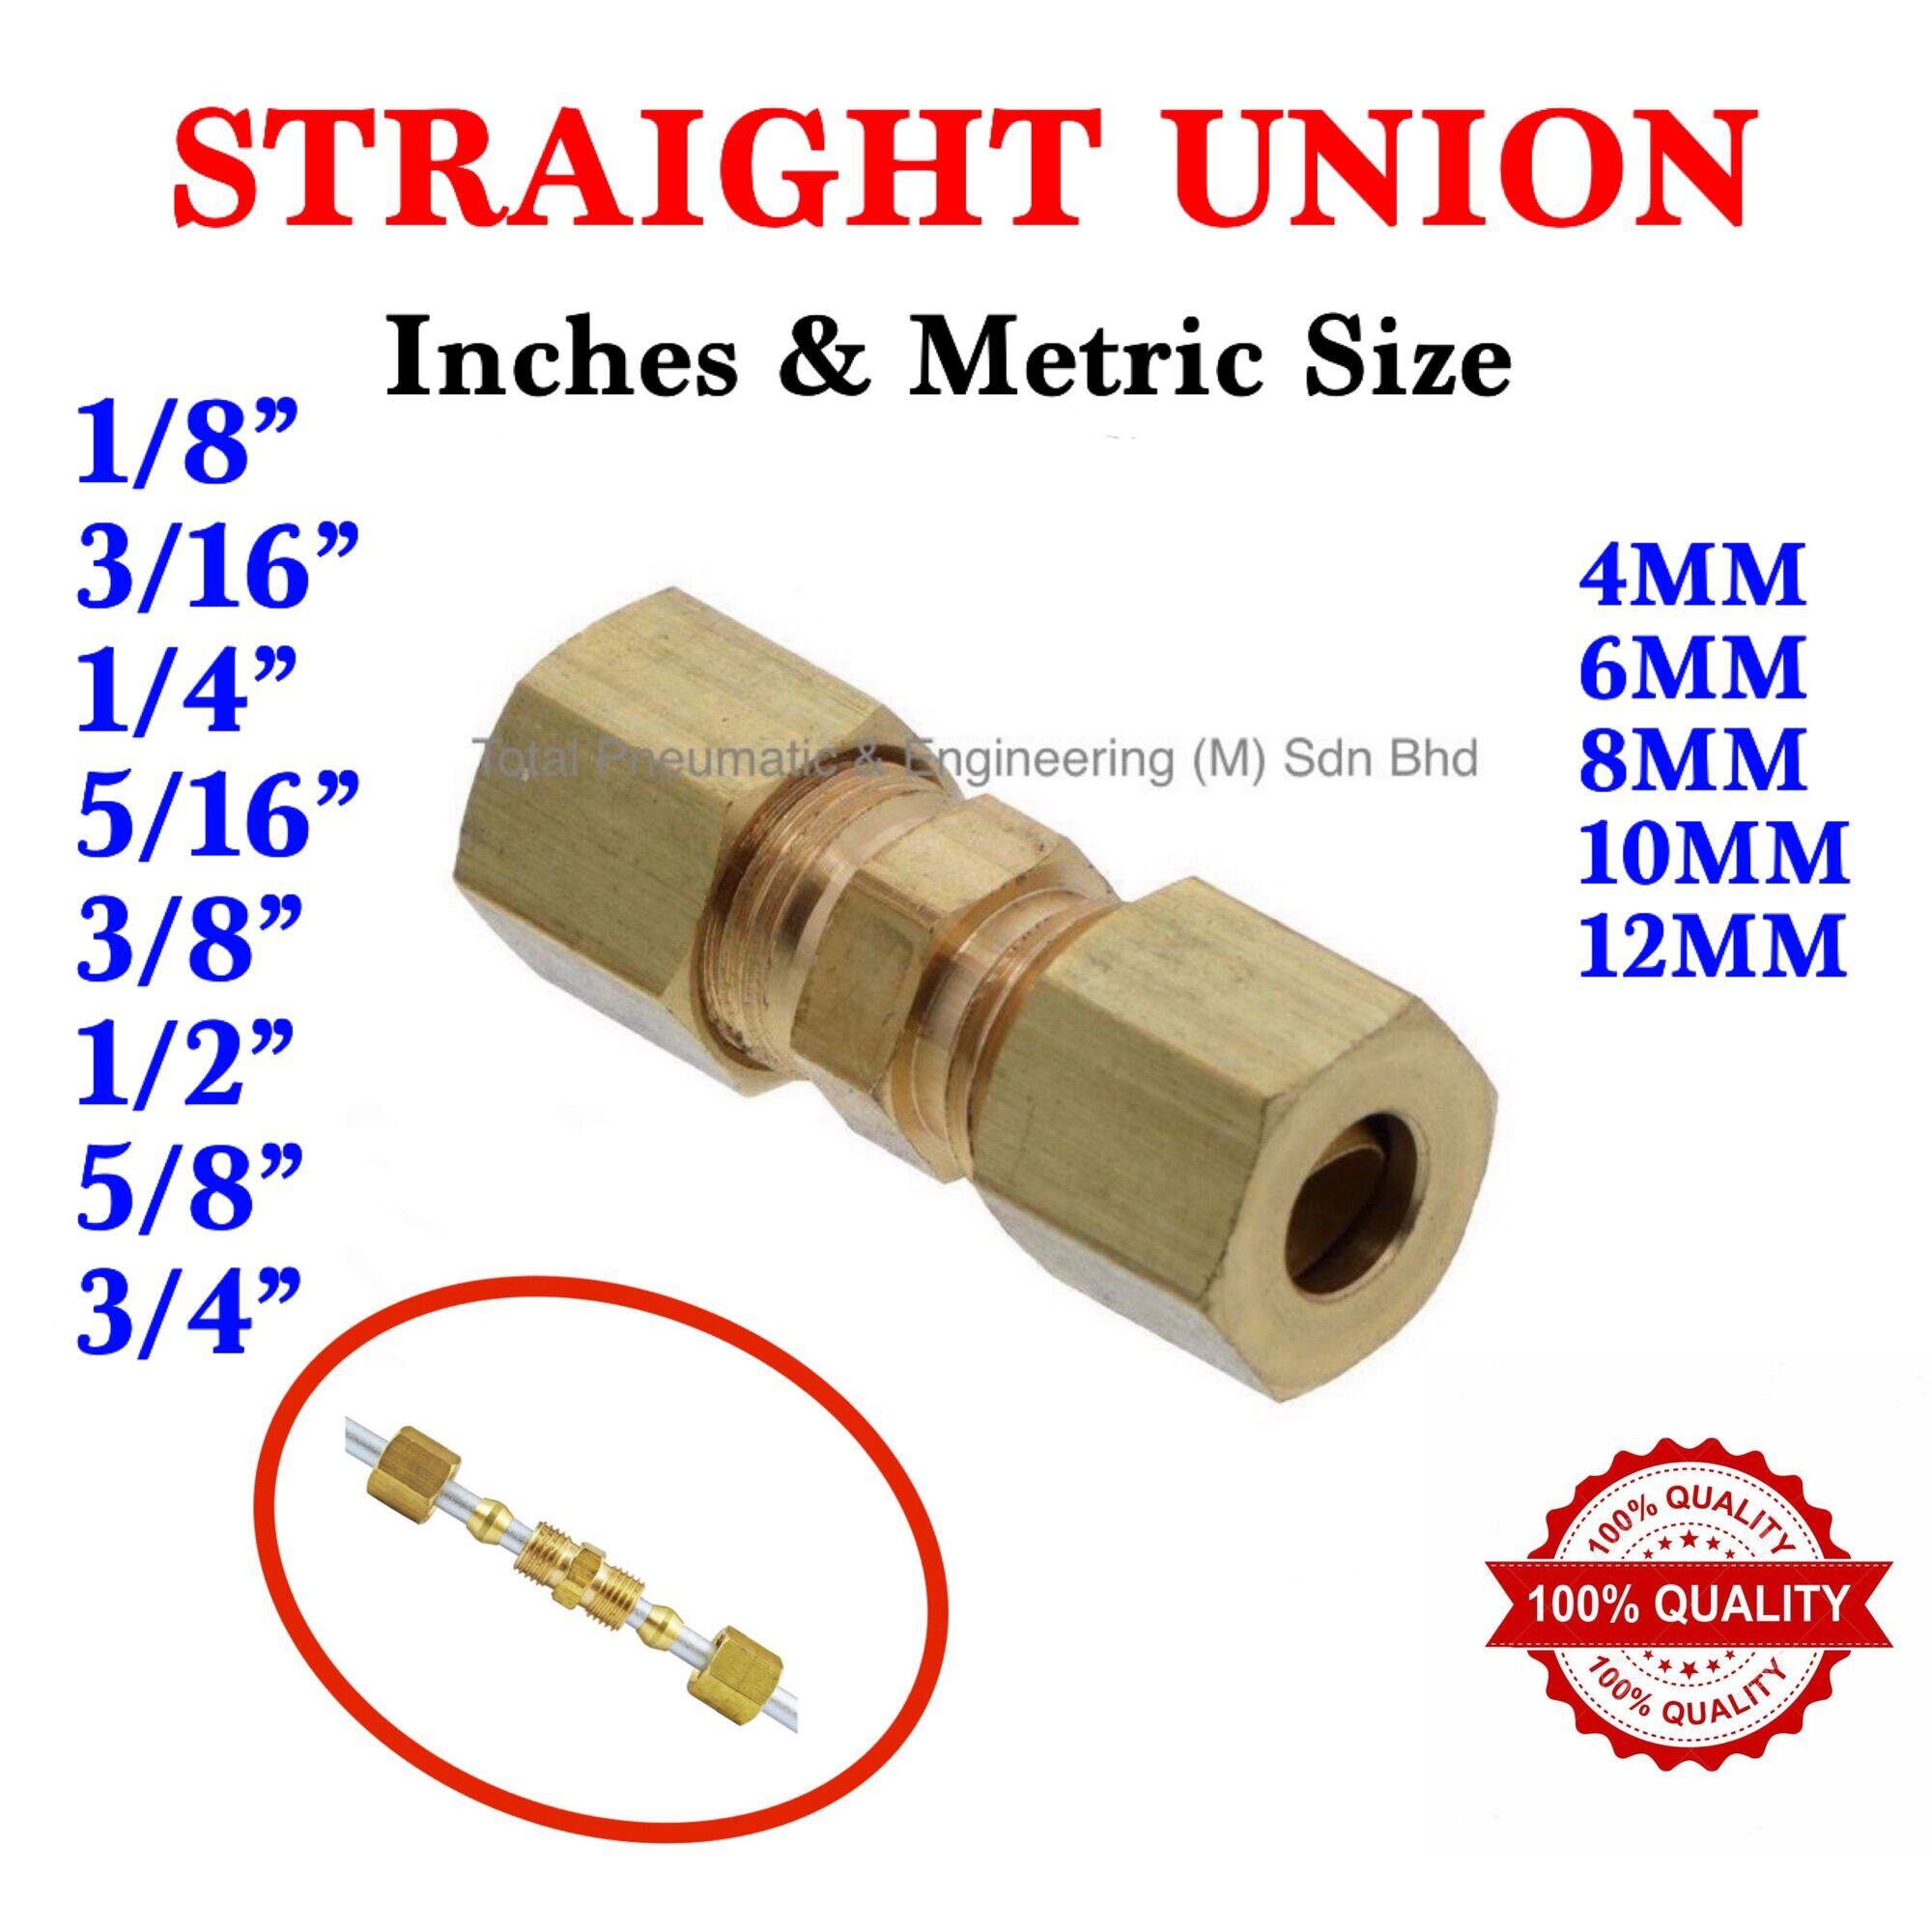 Brass Fitting INCHES & METRIC Size Compression Double Union 1/8” 3/16” 1/4”  5/16” 3/8” 1/2” 5/8” 3/4” 4MM 6MM 8MM 10MM 12MM Pipe Fitting Copper Pipe  Connector Copper Pipe Fitting